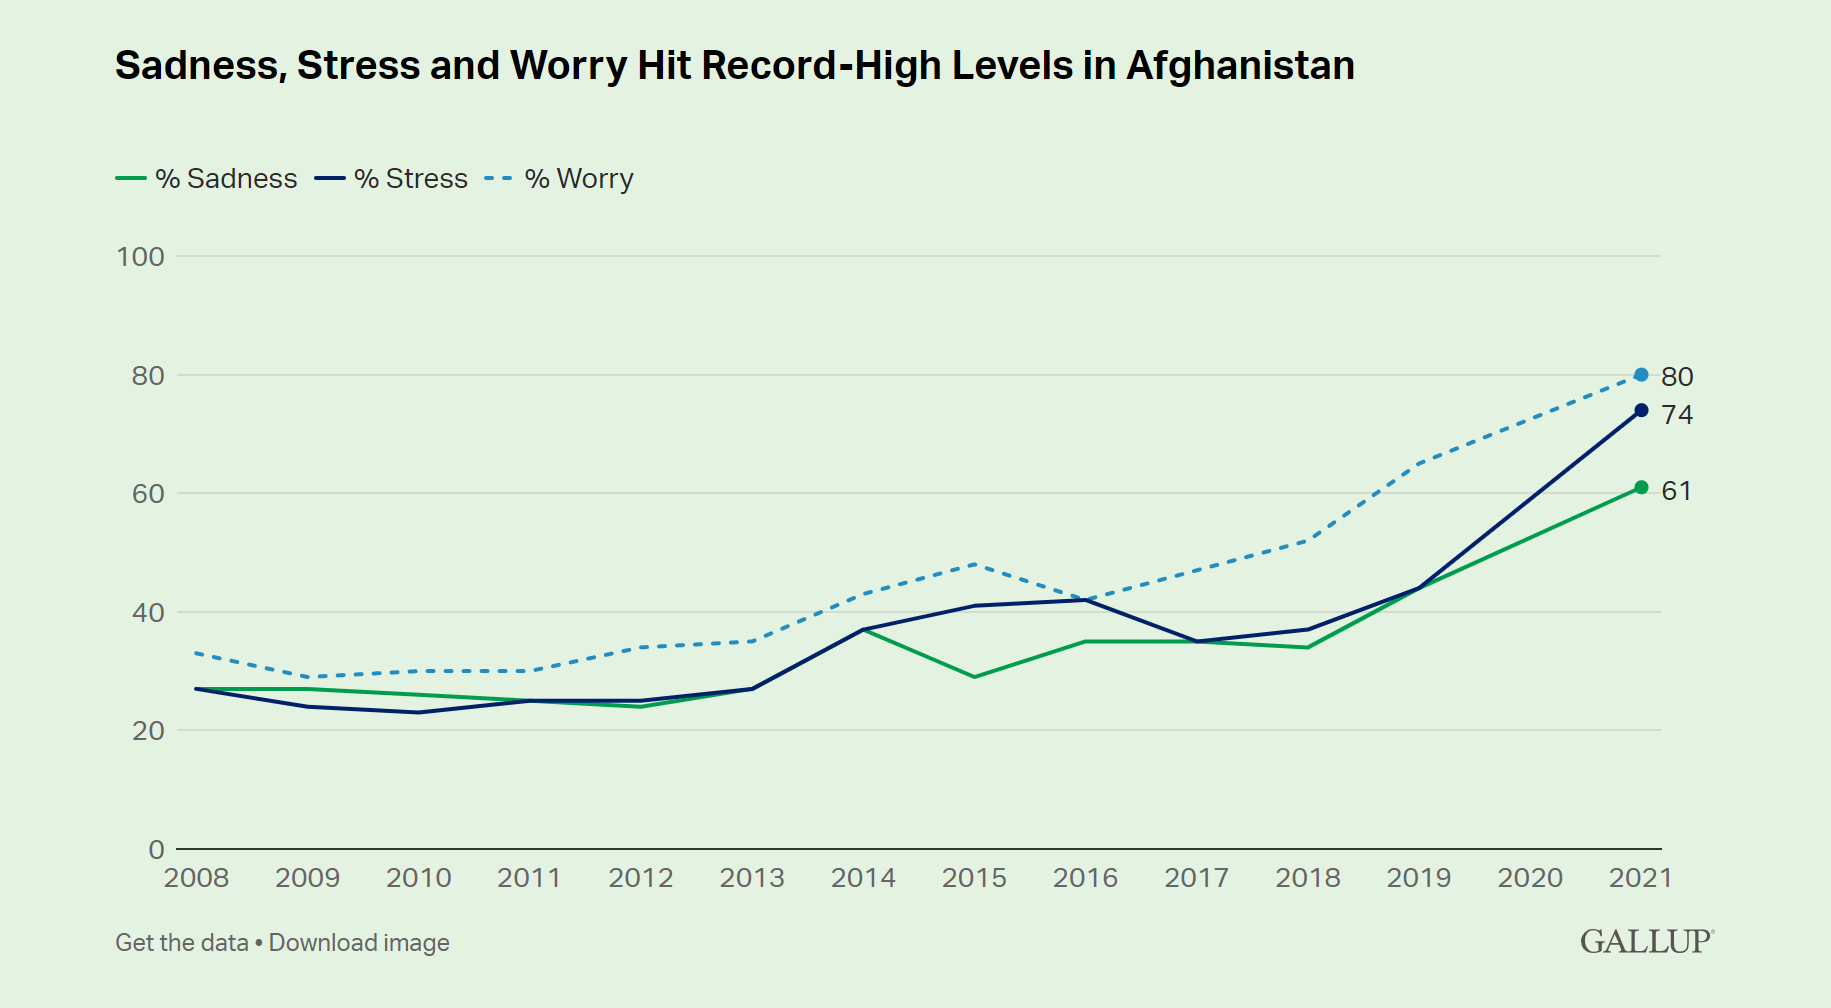 Sadness, Stress, and Worry scores for Afghanistan, 2008-2021. In 2021, Sadness, Stress and Worry hit record-high Levels in Afghanistan. Graphic: Gallup